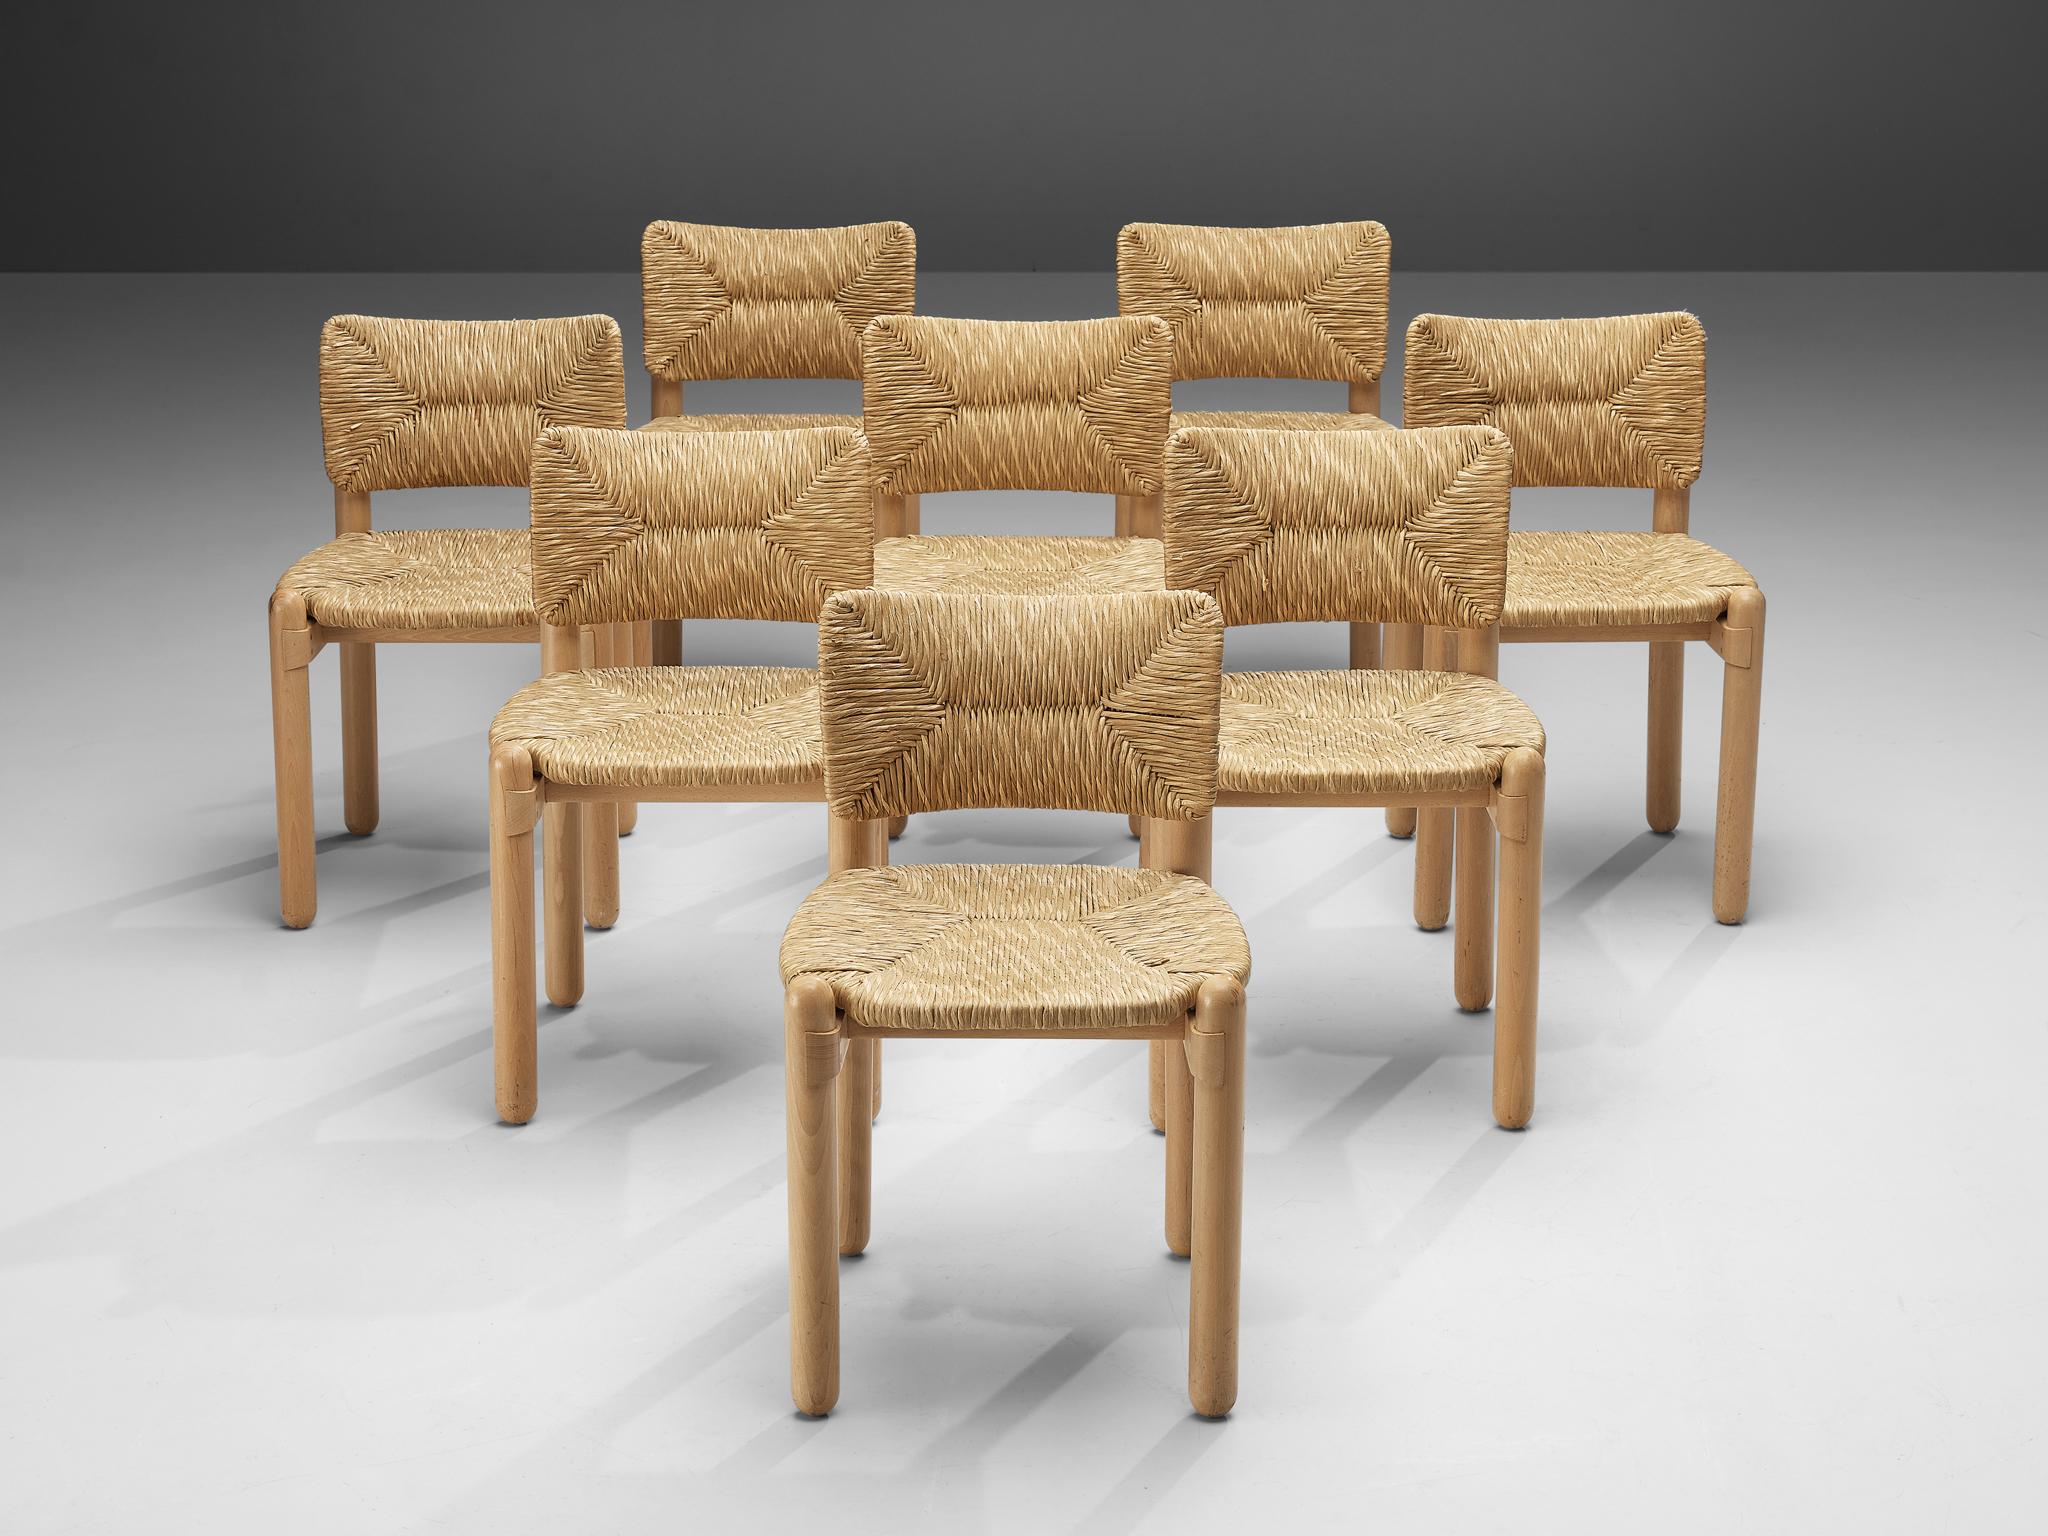 Set of eight dining chairs, beech, straw, Italy, 1970s

This set of eight dining chairs reminds of the designs of Charlotte Perriand. Especially the way how four circular legs are combined with a straw seat and backrest. The bright color of the wood